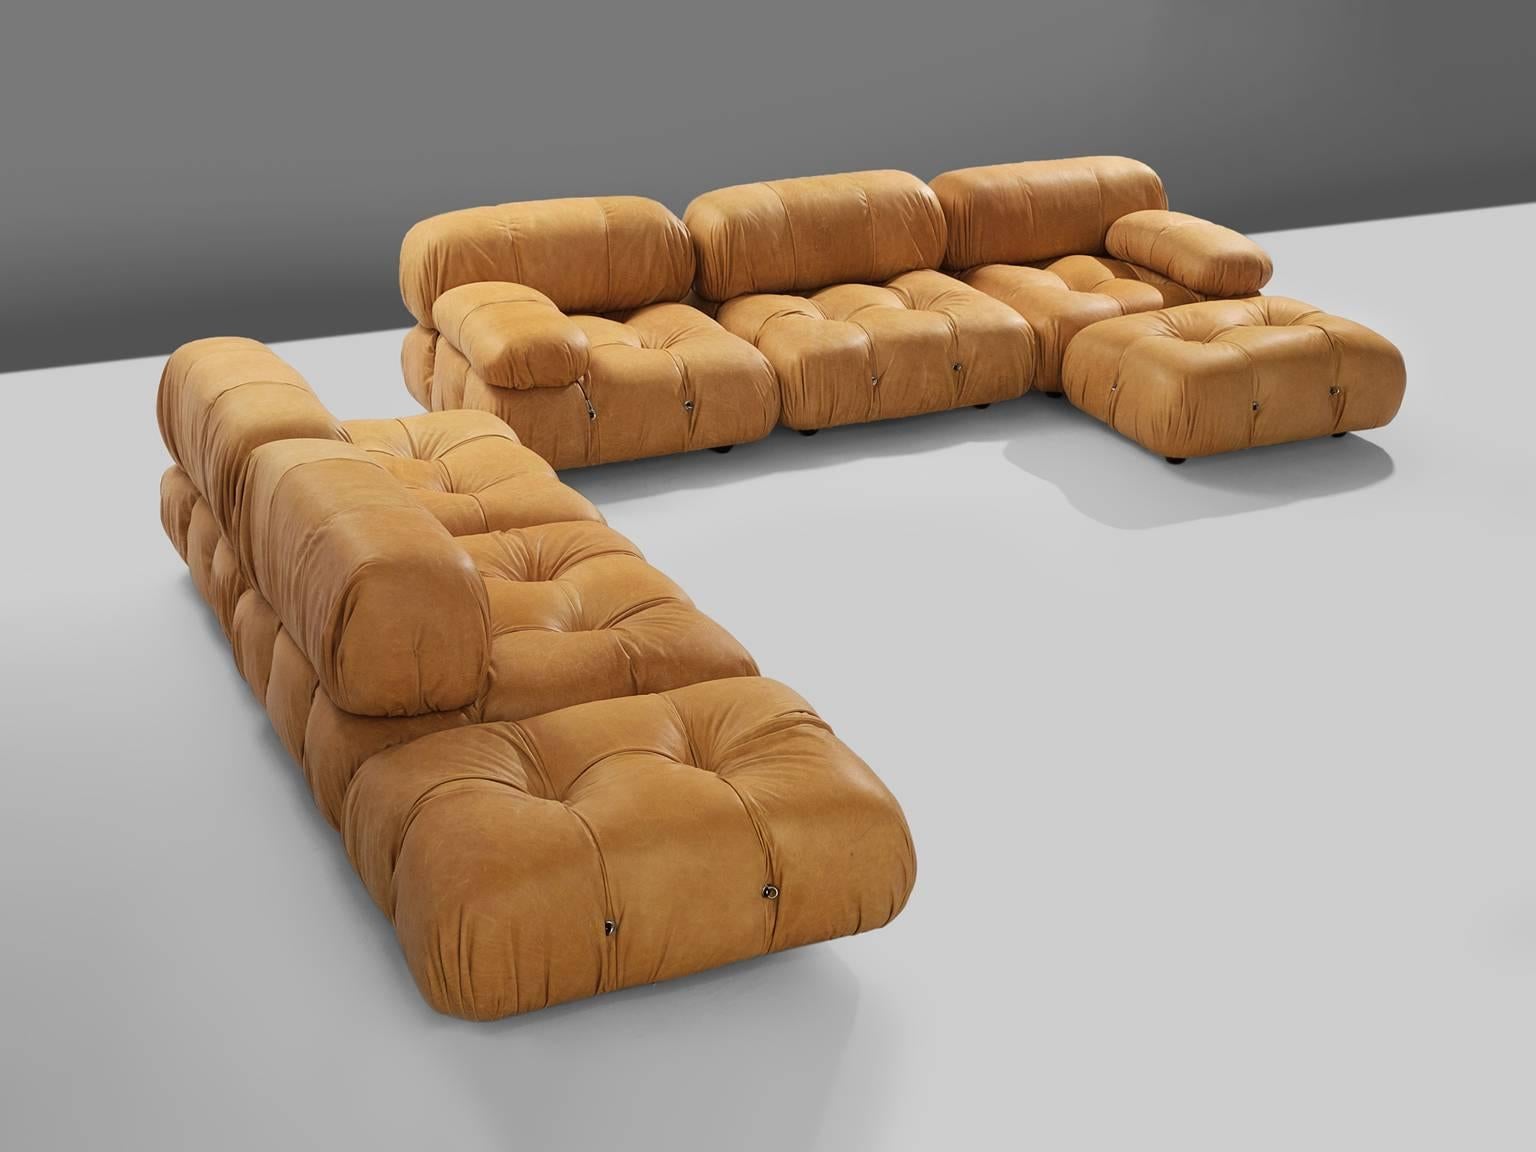 Mario Bellini, large modular 'Cameleonda' sofa, cognac leather upholstery, Italy, 1971, re-upholstered by our in-house upholstery atelier. 

The sectional elements this sofa was made with, can be used freely and apart from one another. The backs and